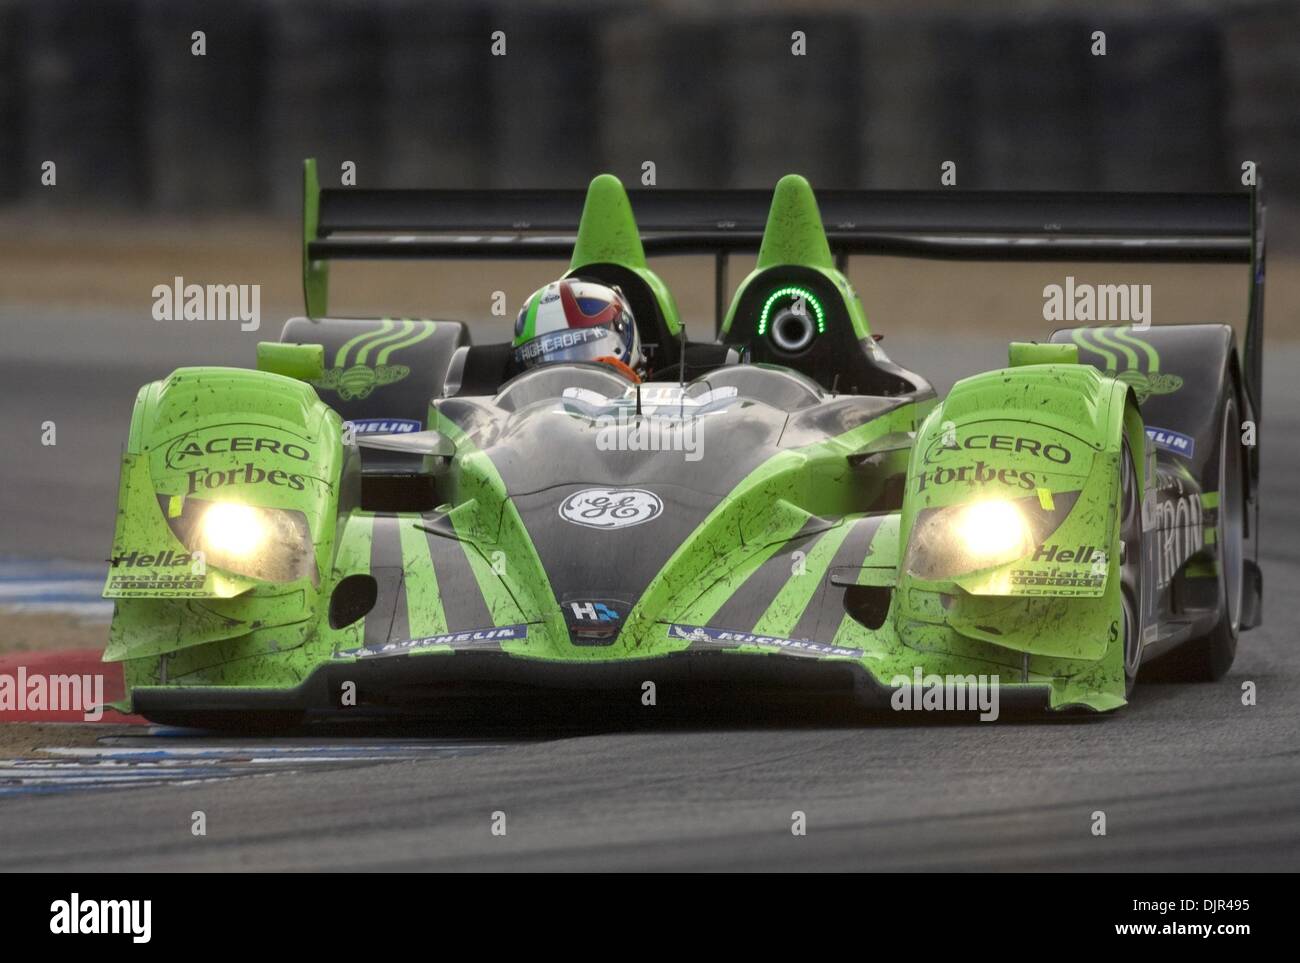 May 22, 2010 - Monterey, California, USA - Patron Highcroft Racing (PHR) scored an exhausting victory in the American Le Mans Series presented by Tequila Patron. The HPD ARX-01c of David Brabham, Simon Pagenaud and Marino Franchitti won an epic six-hour race at Mazda (Credit Image: Â© William Mancebo/ZUMApress.com) Stock Photo